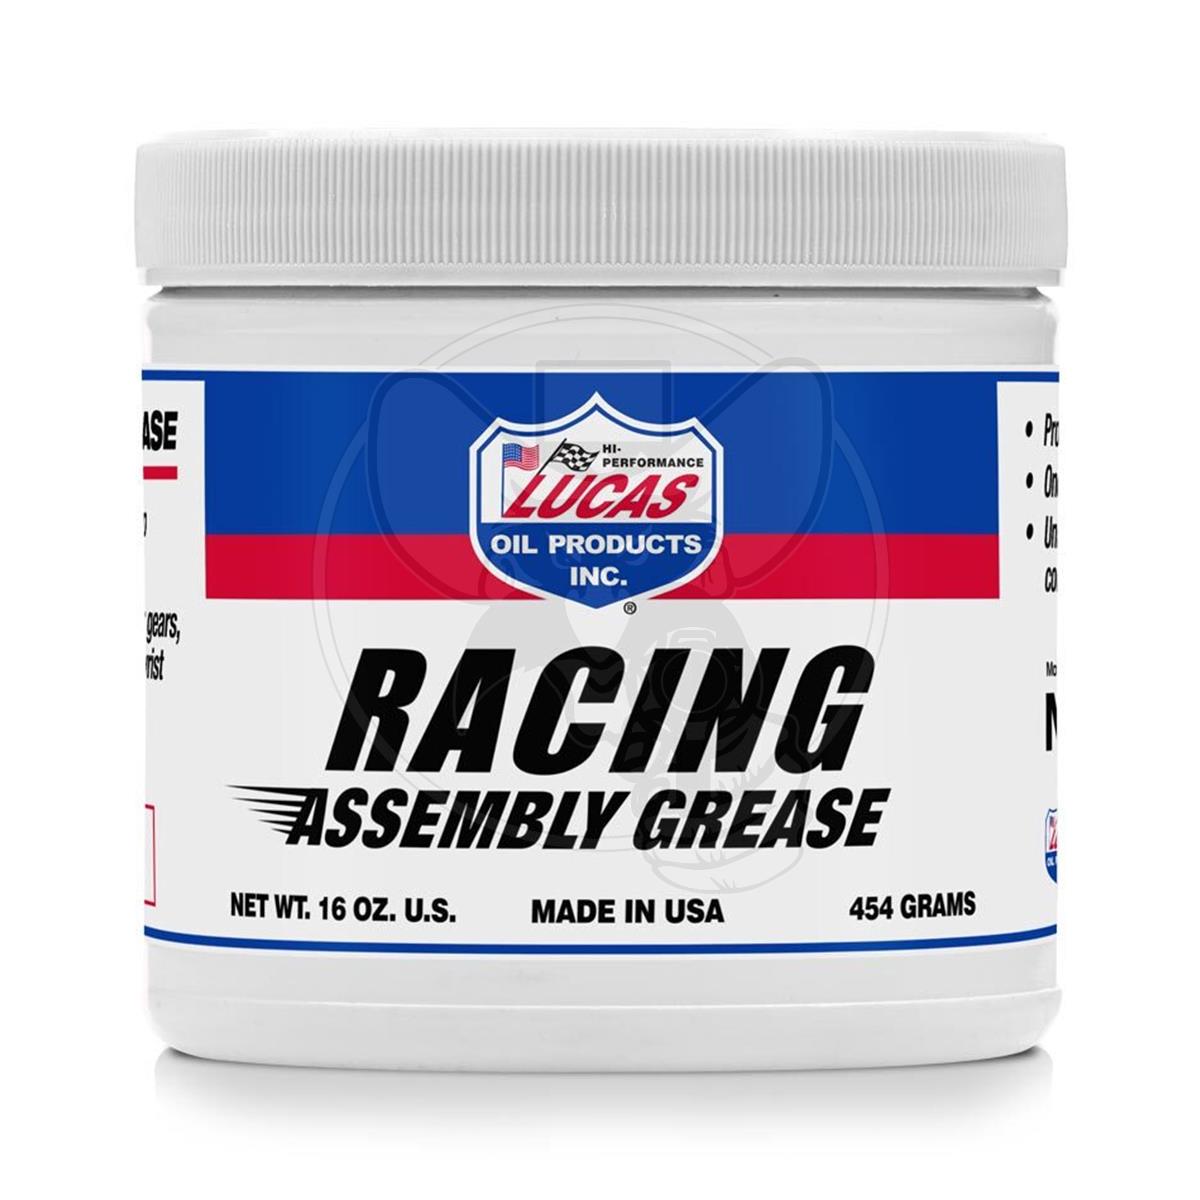 LUCAS RACING ASSEMBLY GREASE/1X1/ 16 OUNCE